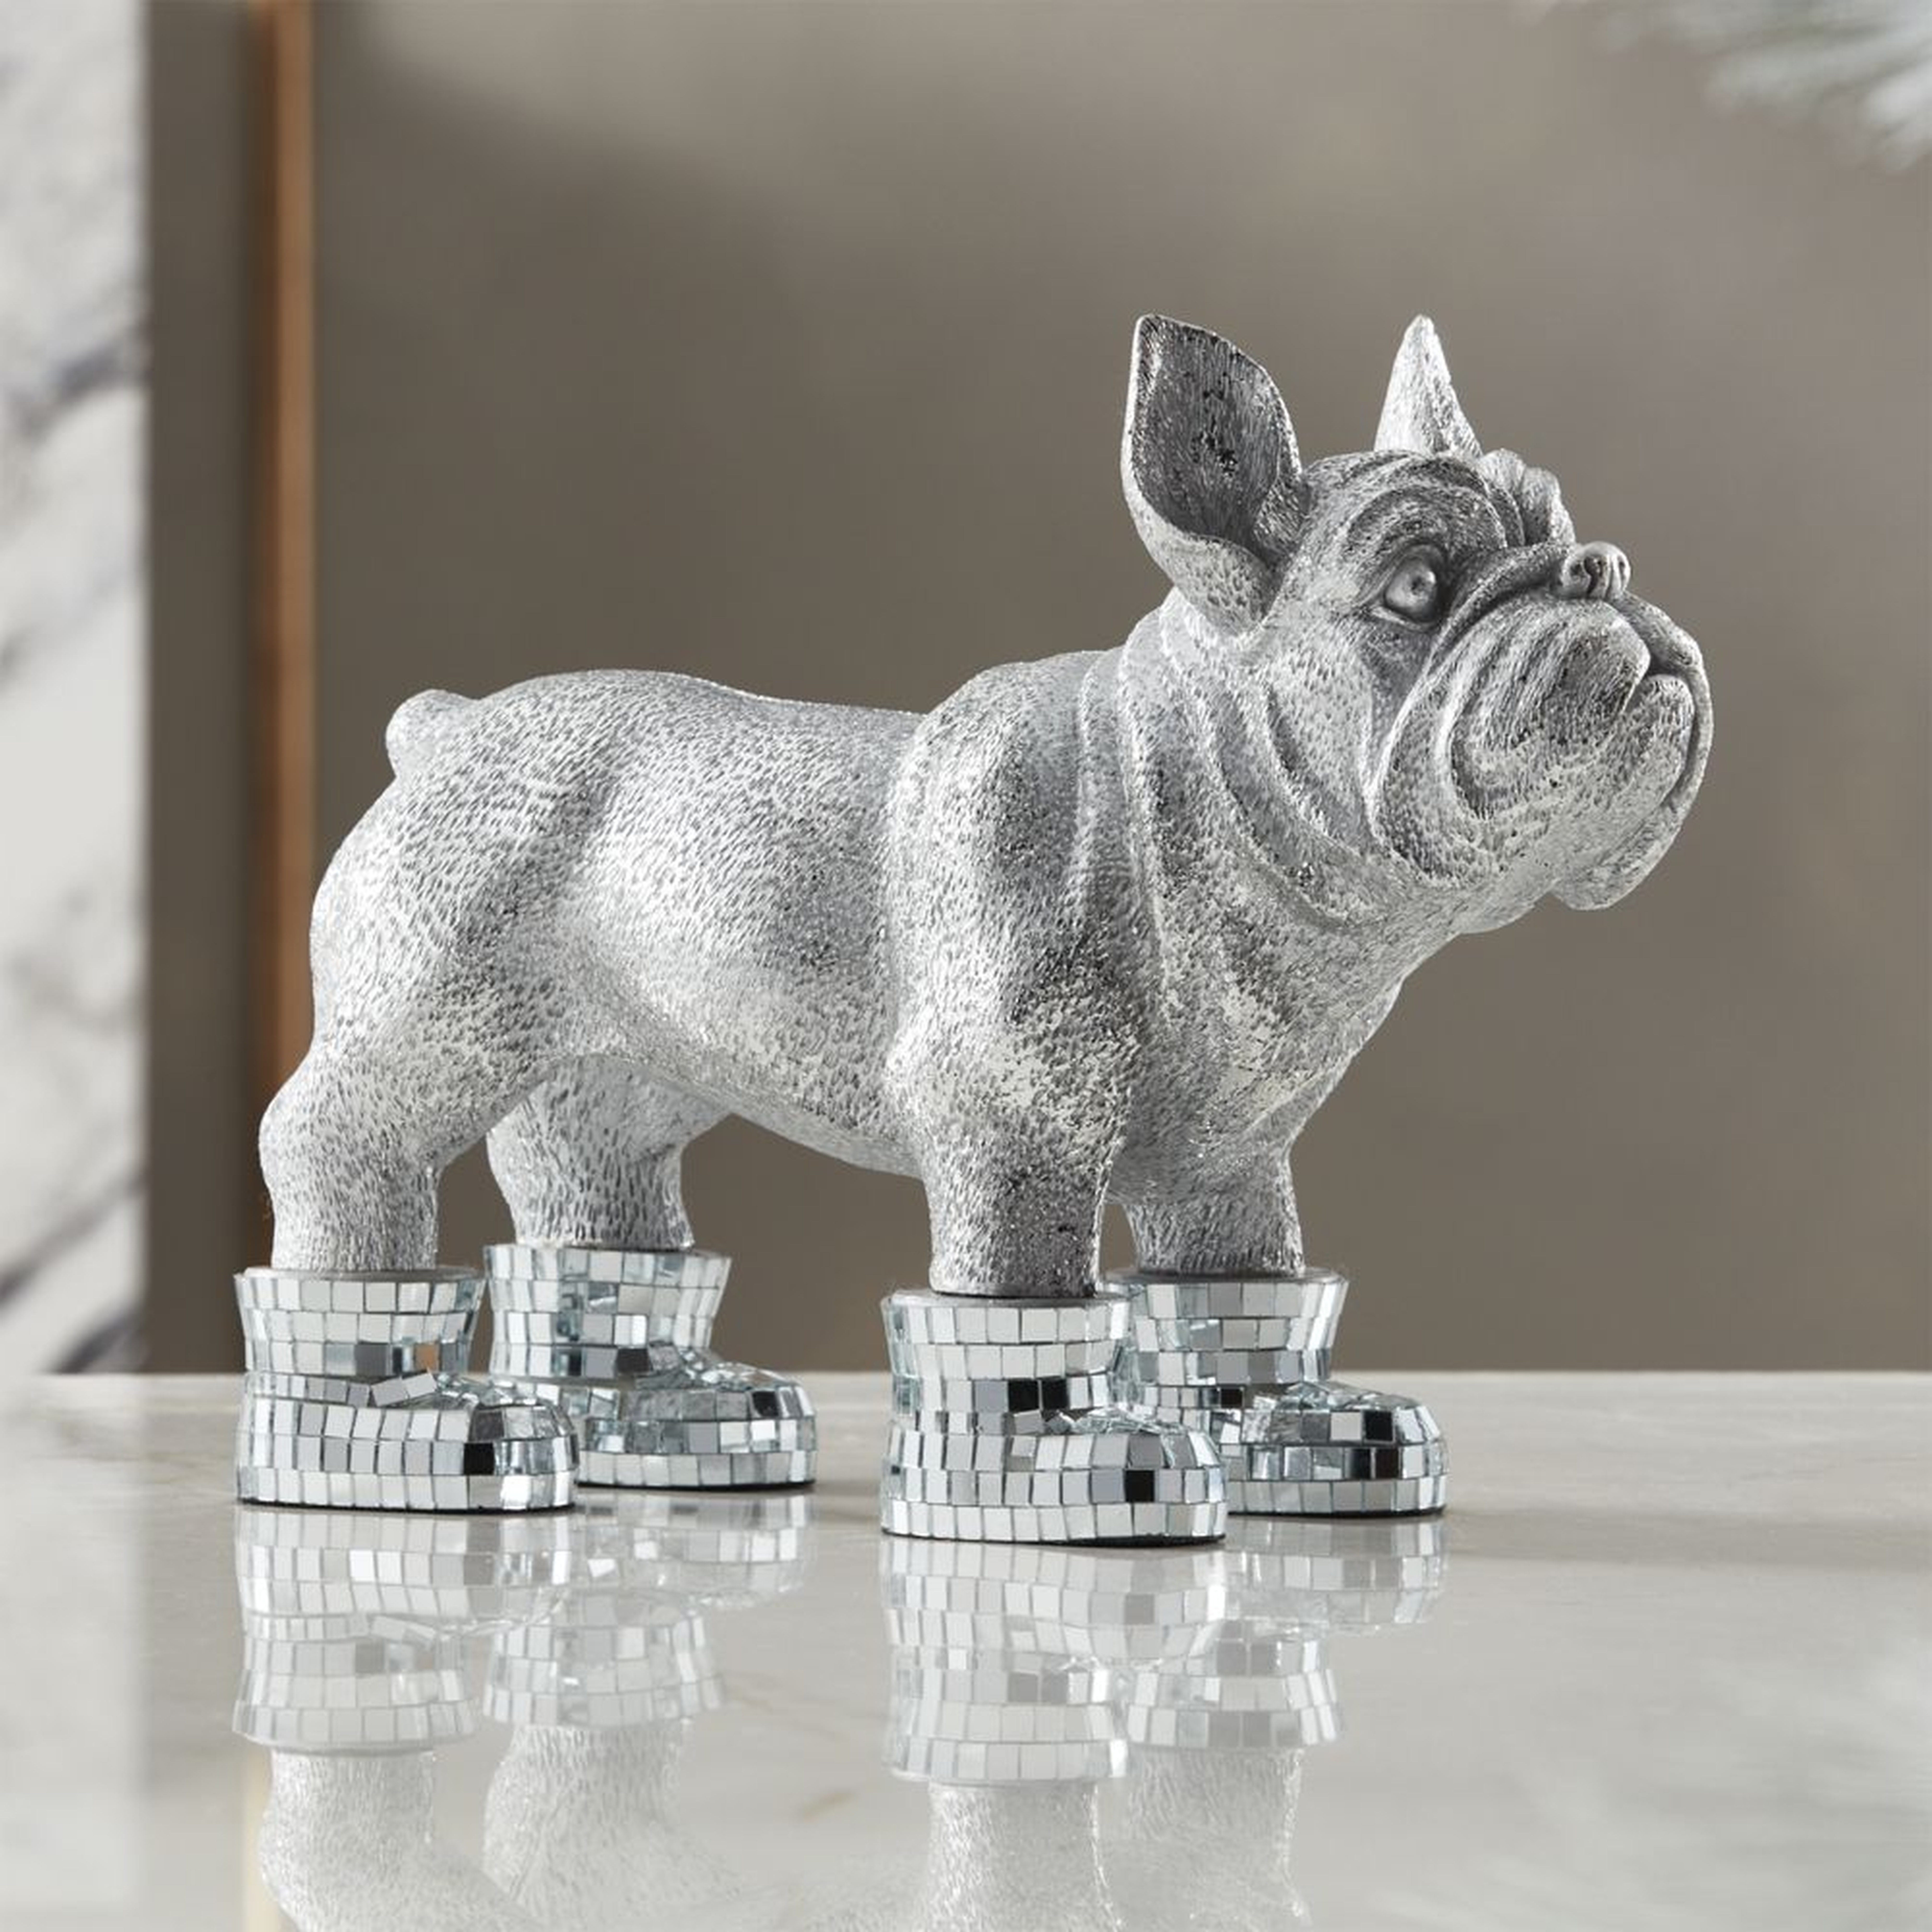 French Bulldog Sculpture with Mirror Boots - CB2